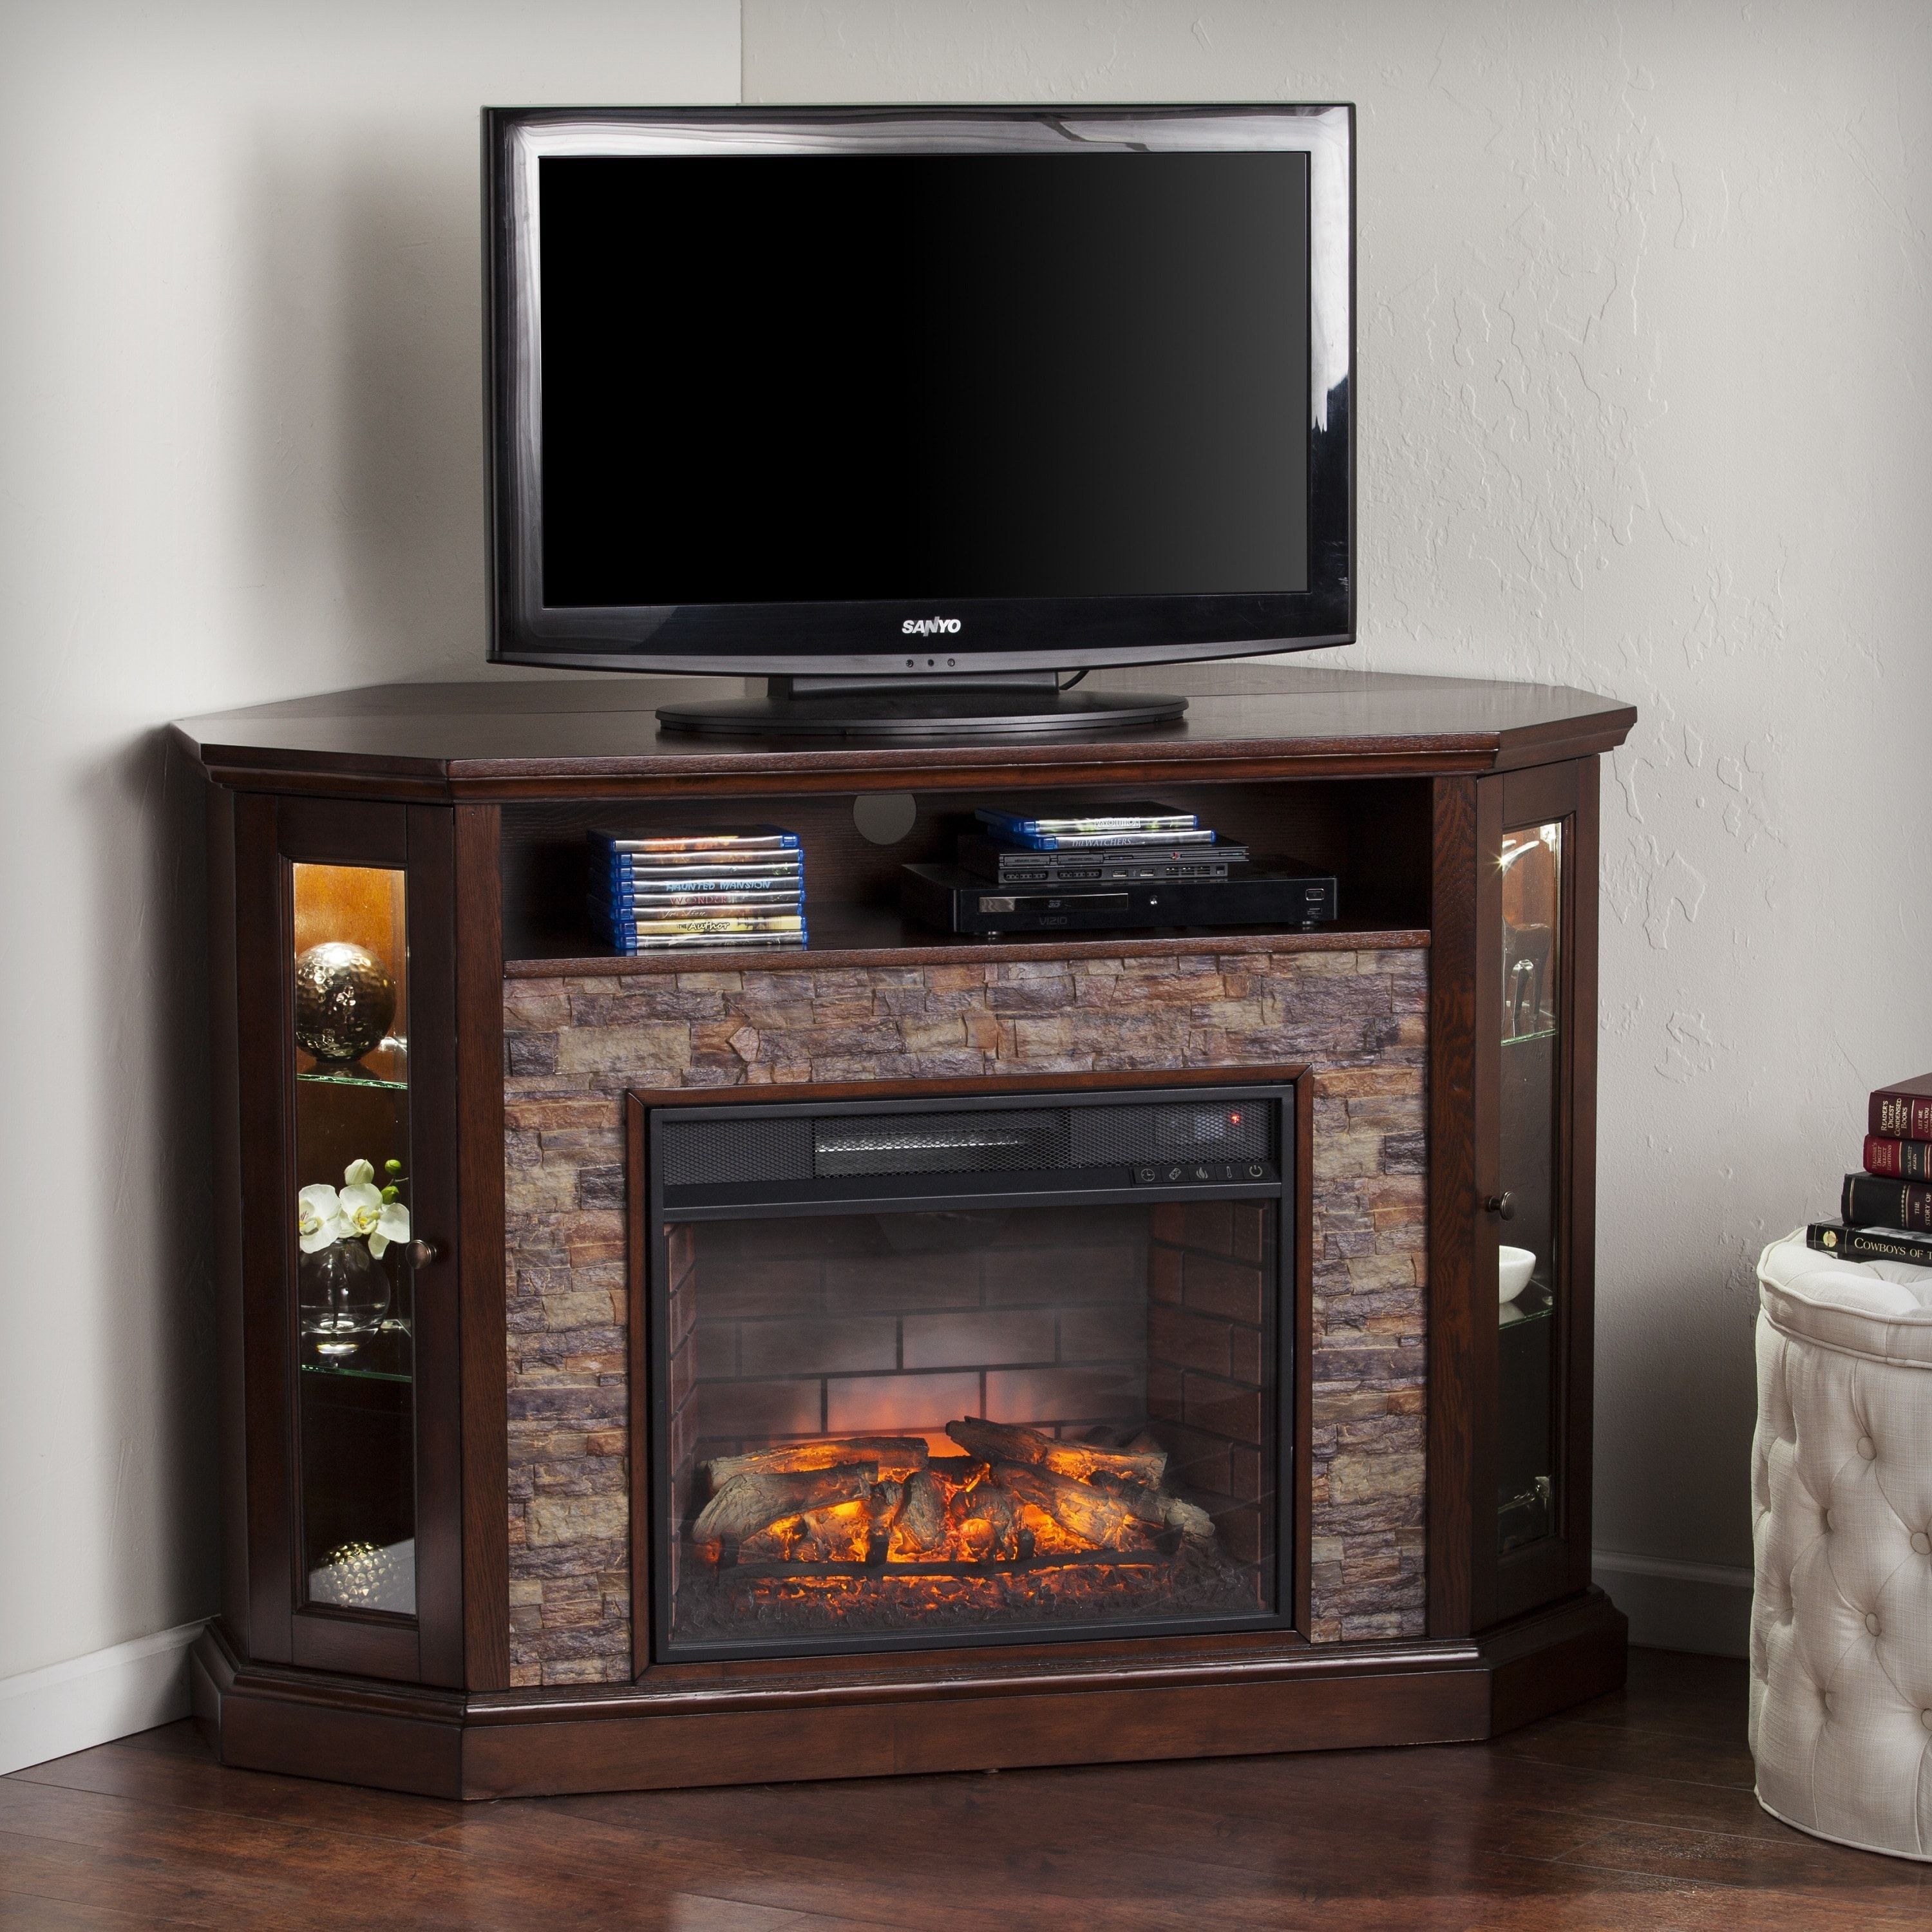 Stone Electric Fireplace Tv Stand Fresh Harper Blvd Ratner Faux Stone Corner Convertible Infrared